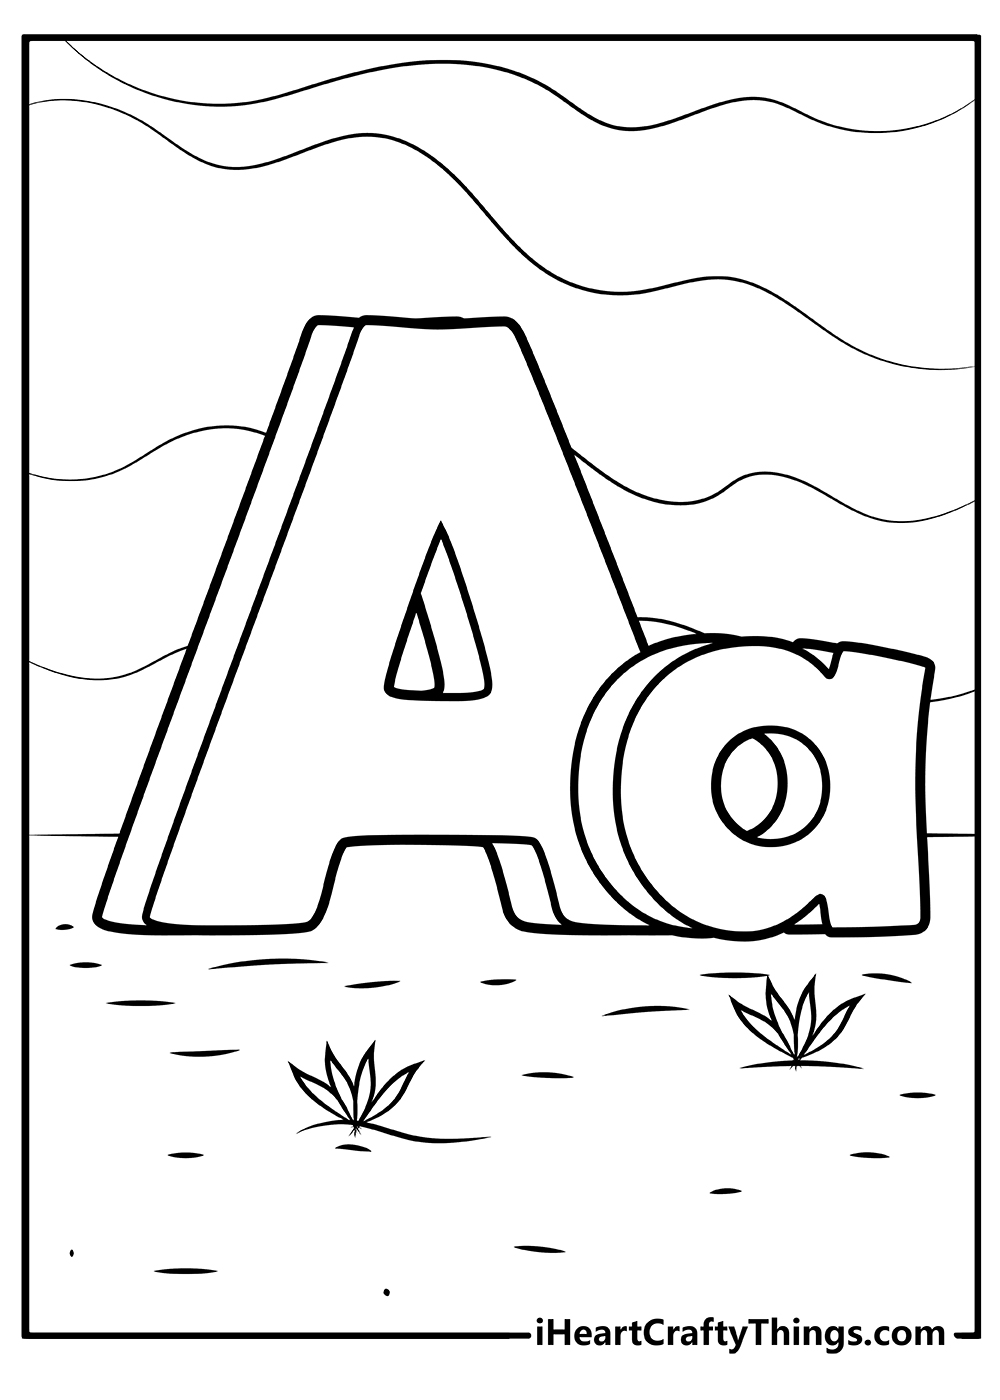 Printable Alphabet Coloring Pages Updated 20